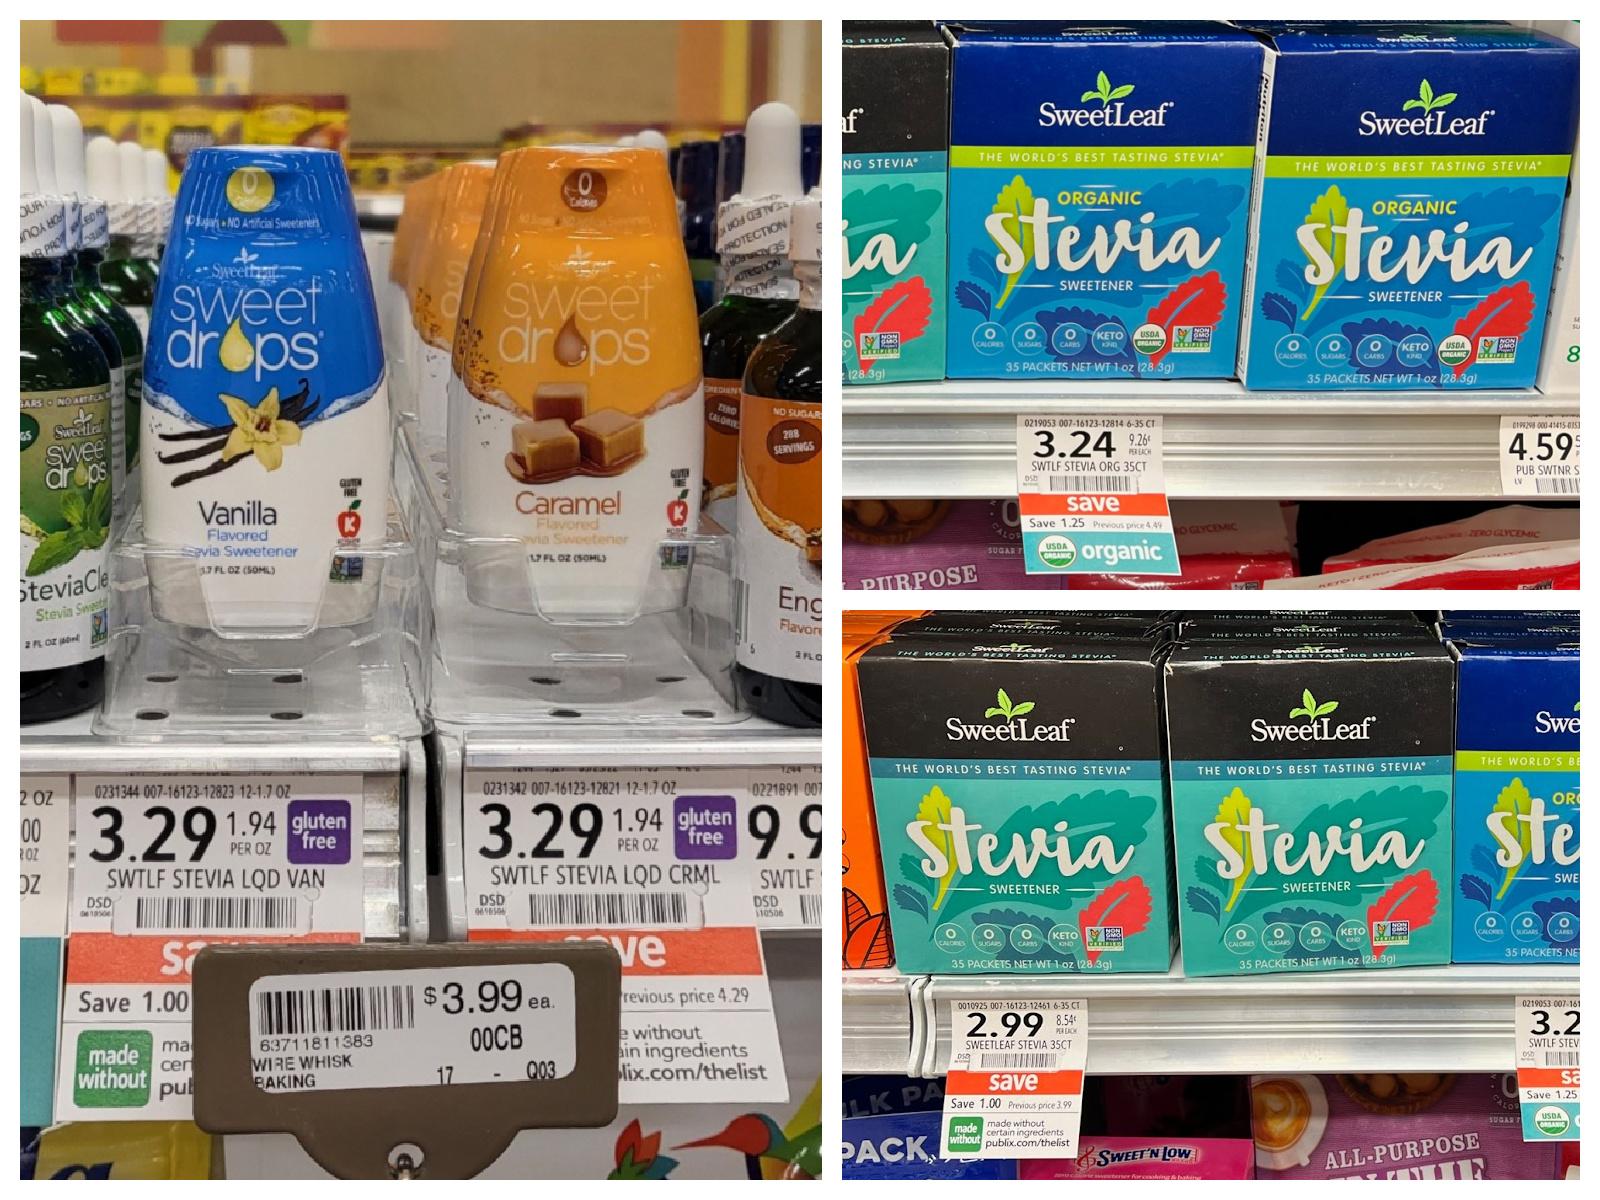 SweetLeaf Sweet Drops Just $2.09 At Publix - Less Than Half Price! on I Heart Publix